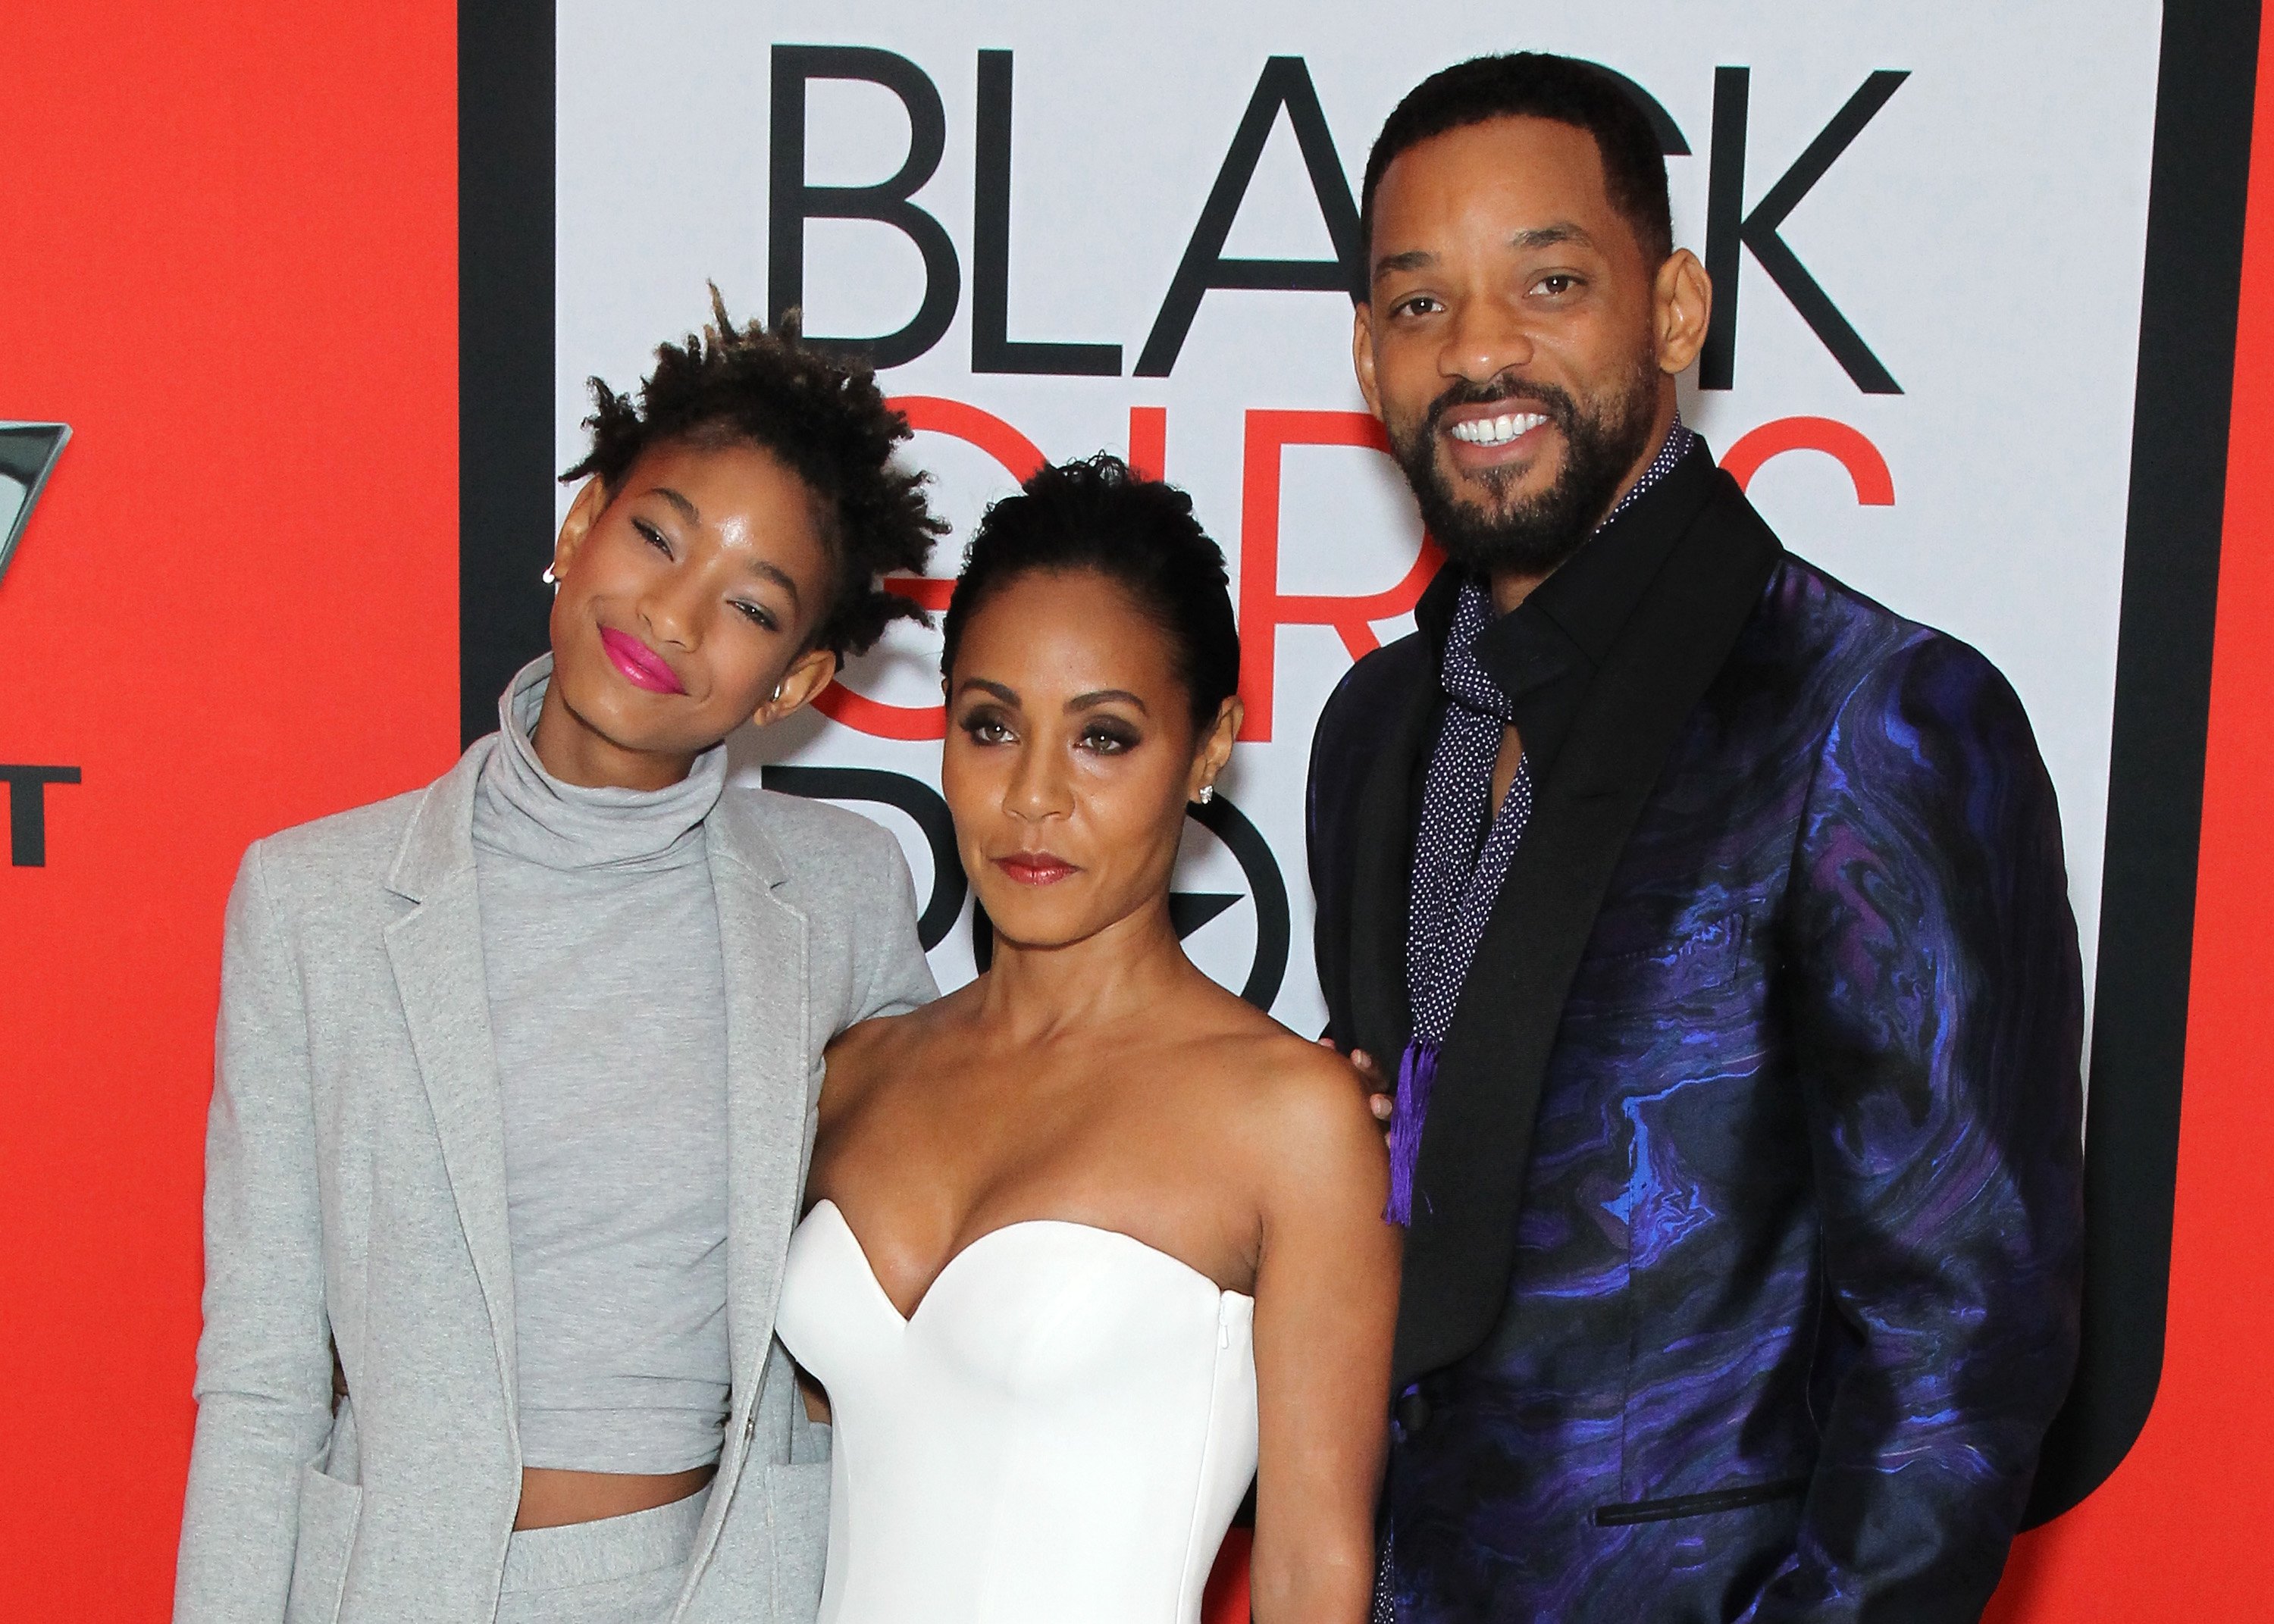 Willow Smith, Jada Pinkett Smith, and Will Smith attend the BET's "Black Girls Rock!" Red Carpet sponsored by Chevrolet at NJPAC  Prudential Hall on March 28, 2015 in Newark, New Jersey.